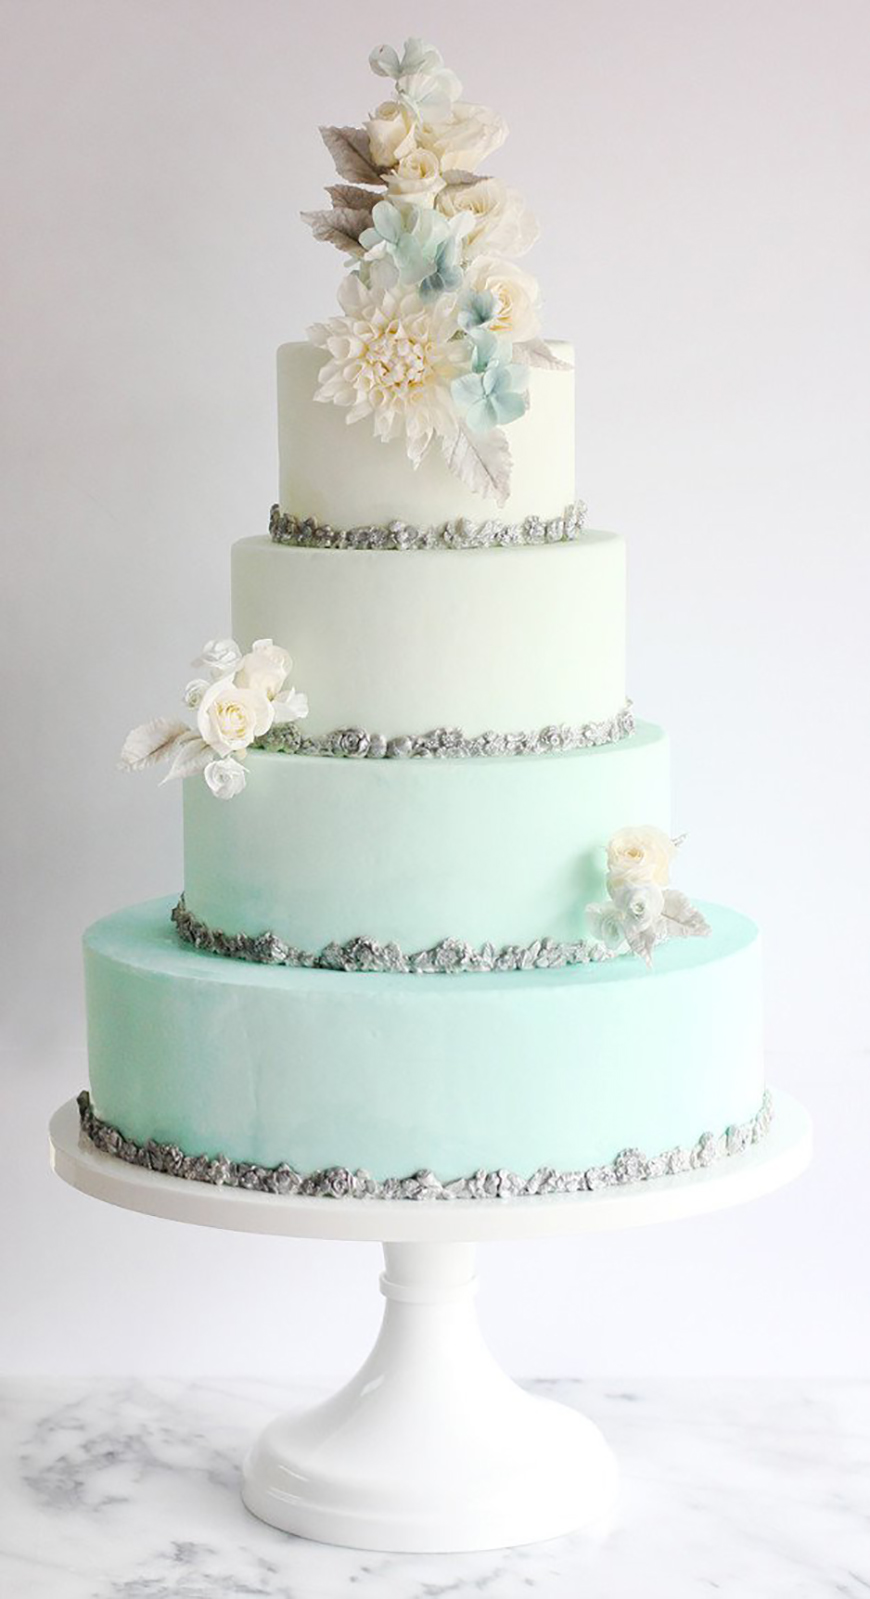 22 Wedding Cakes Fit for a Fairy Tale - A winter's tale | CHWV